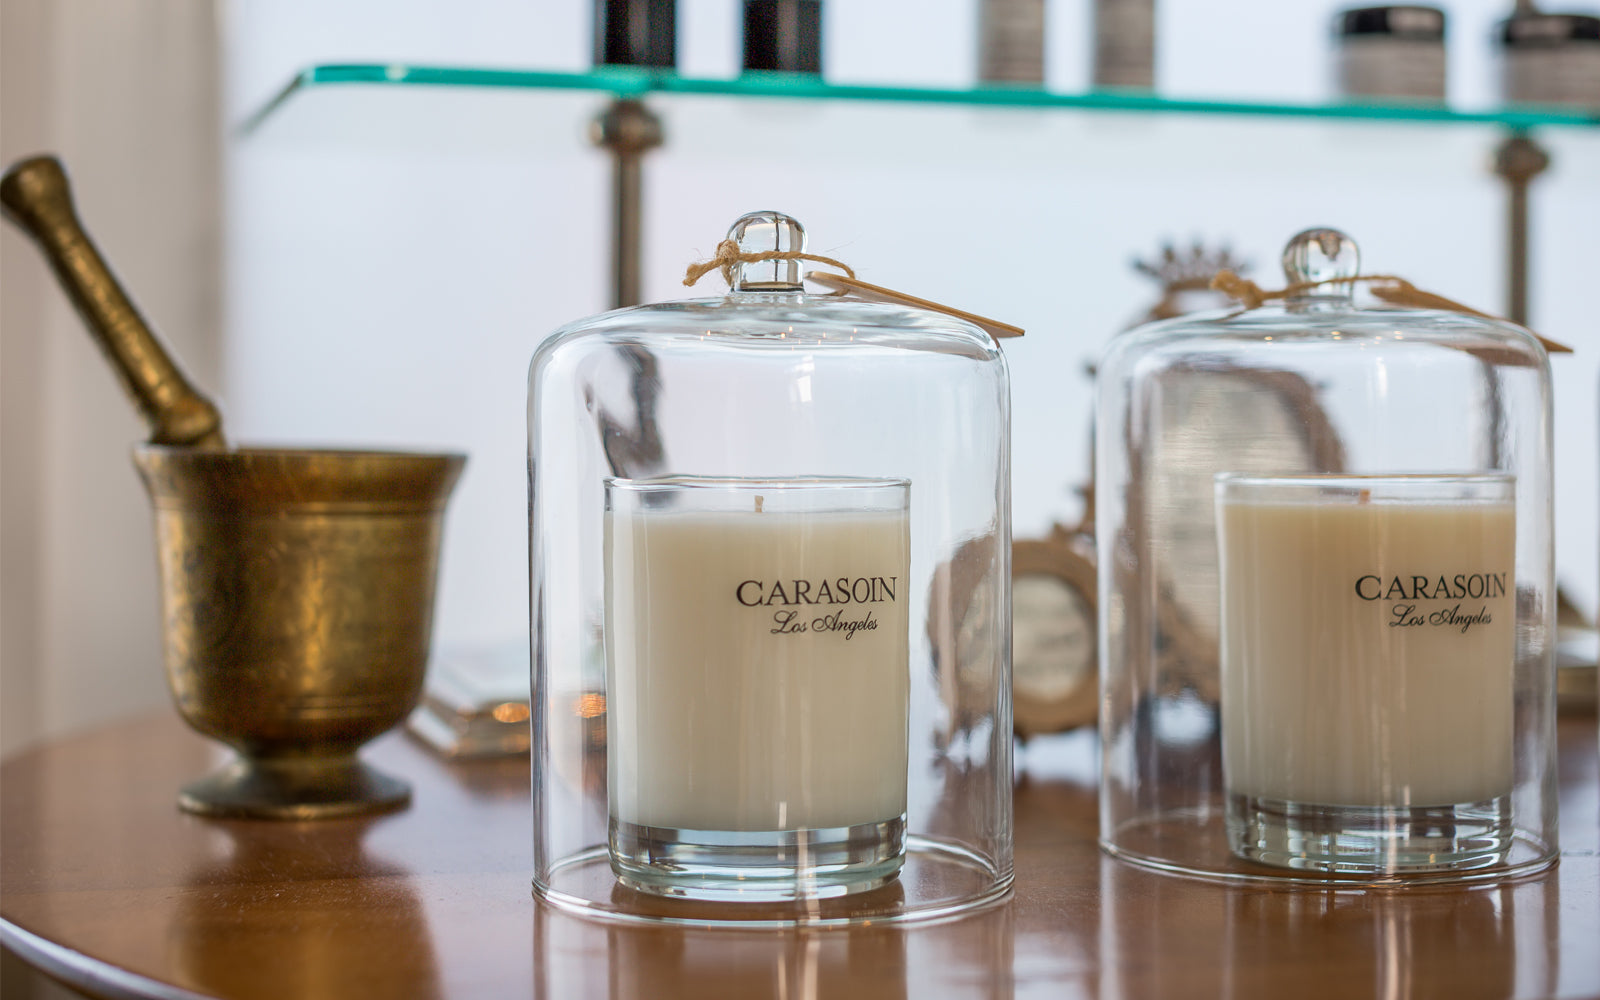 Carasoin products on a shelf, including candles and a mixing bowl